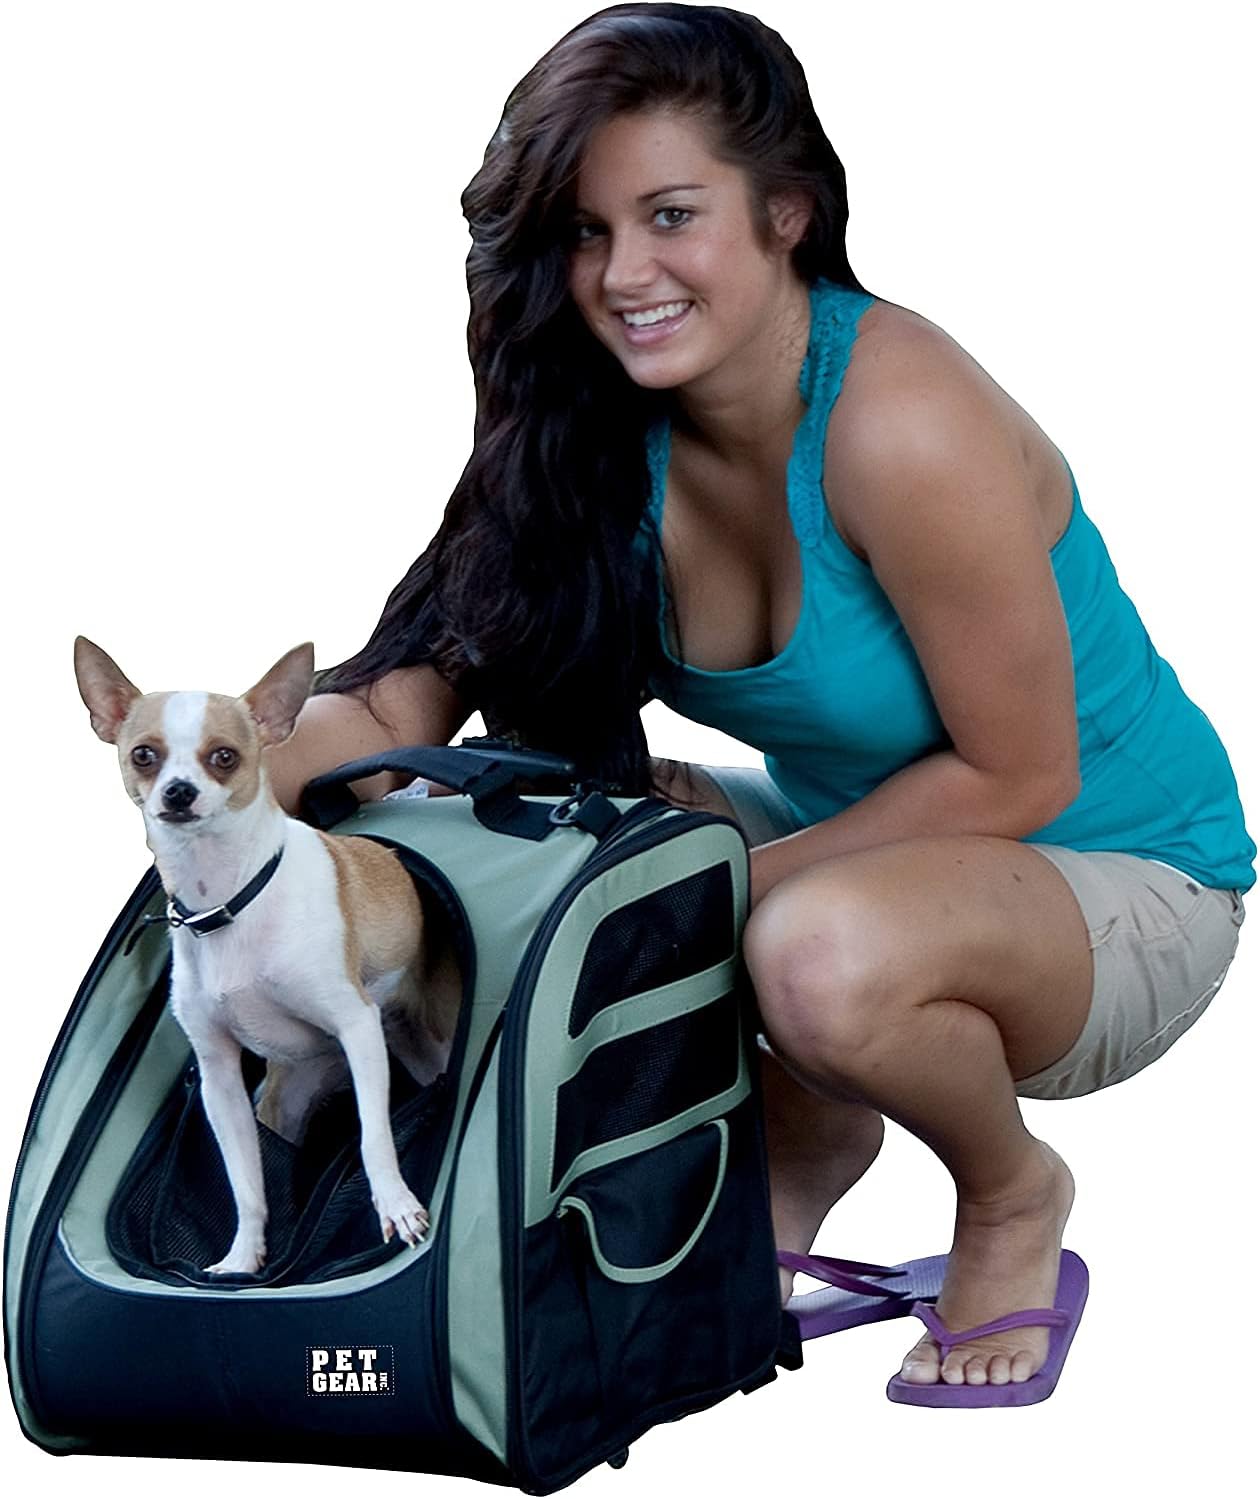 Pet Gear I-GO2 Roller Backpack, Travel Carrier, Car Seat for Cats\/Dogs, Mesh Ventilation, Included Tether, Telescoping Handle, Storage Pouch, 1 Model, Available in 5 Colors